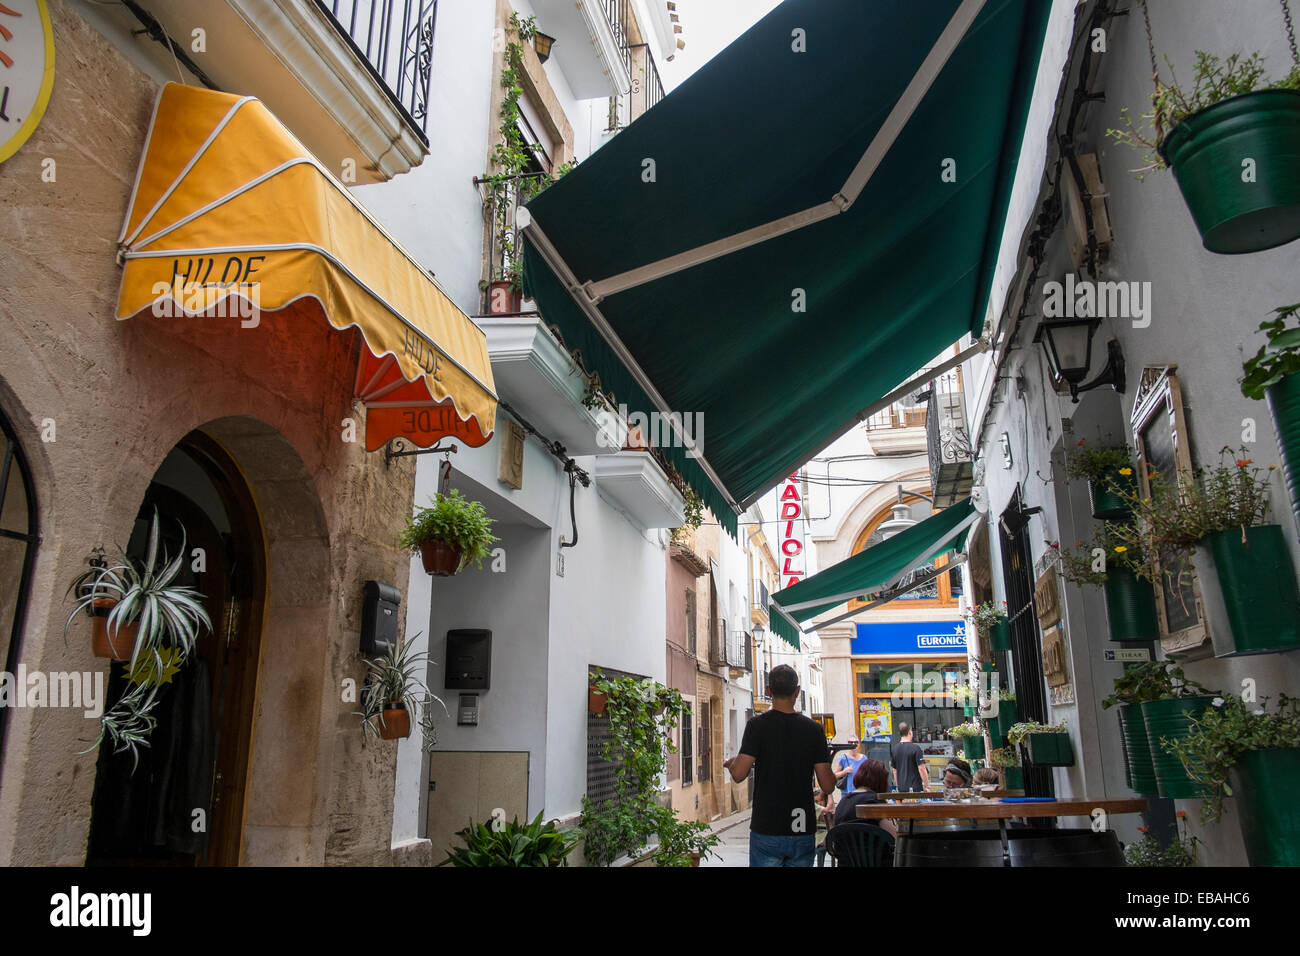 A side street in Javea Old Town, Valencia, Spain. Stock Photo